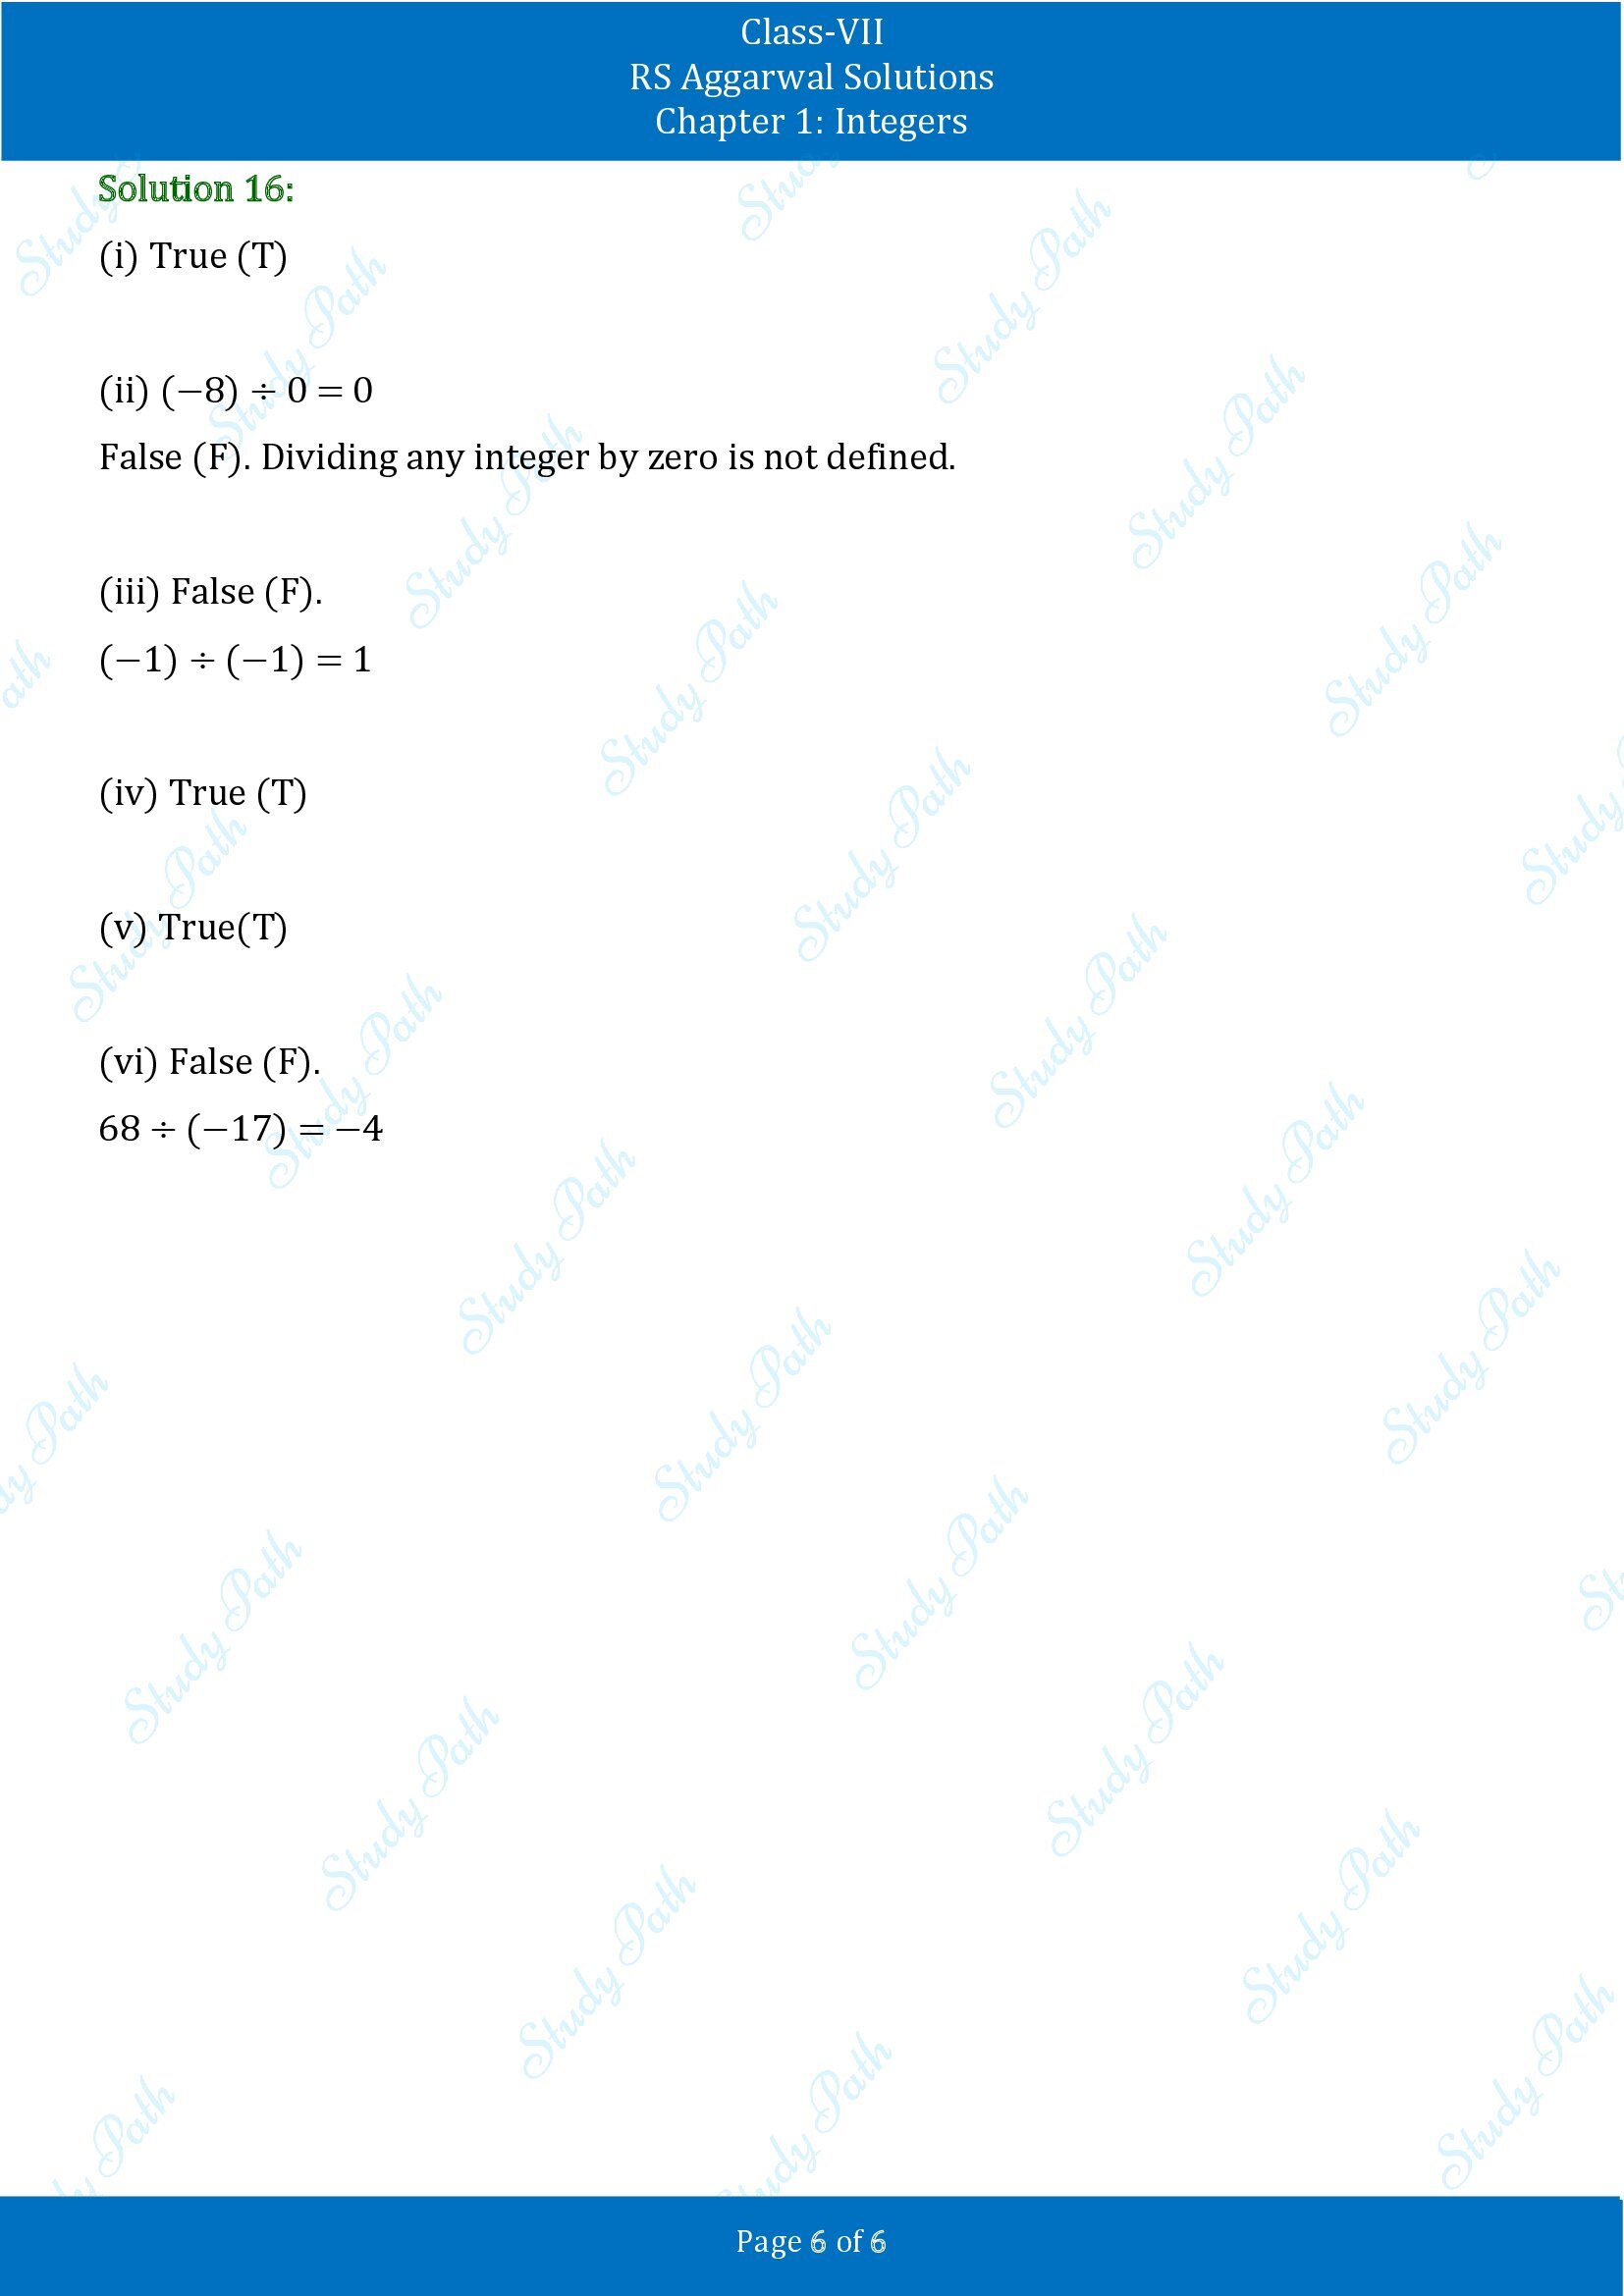 RS Aggarwal Solutions Class 7 Chapter 1 Integers Test Paper 00006